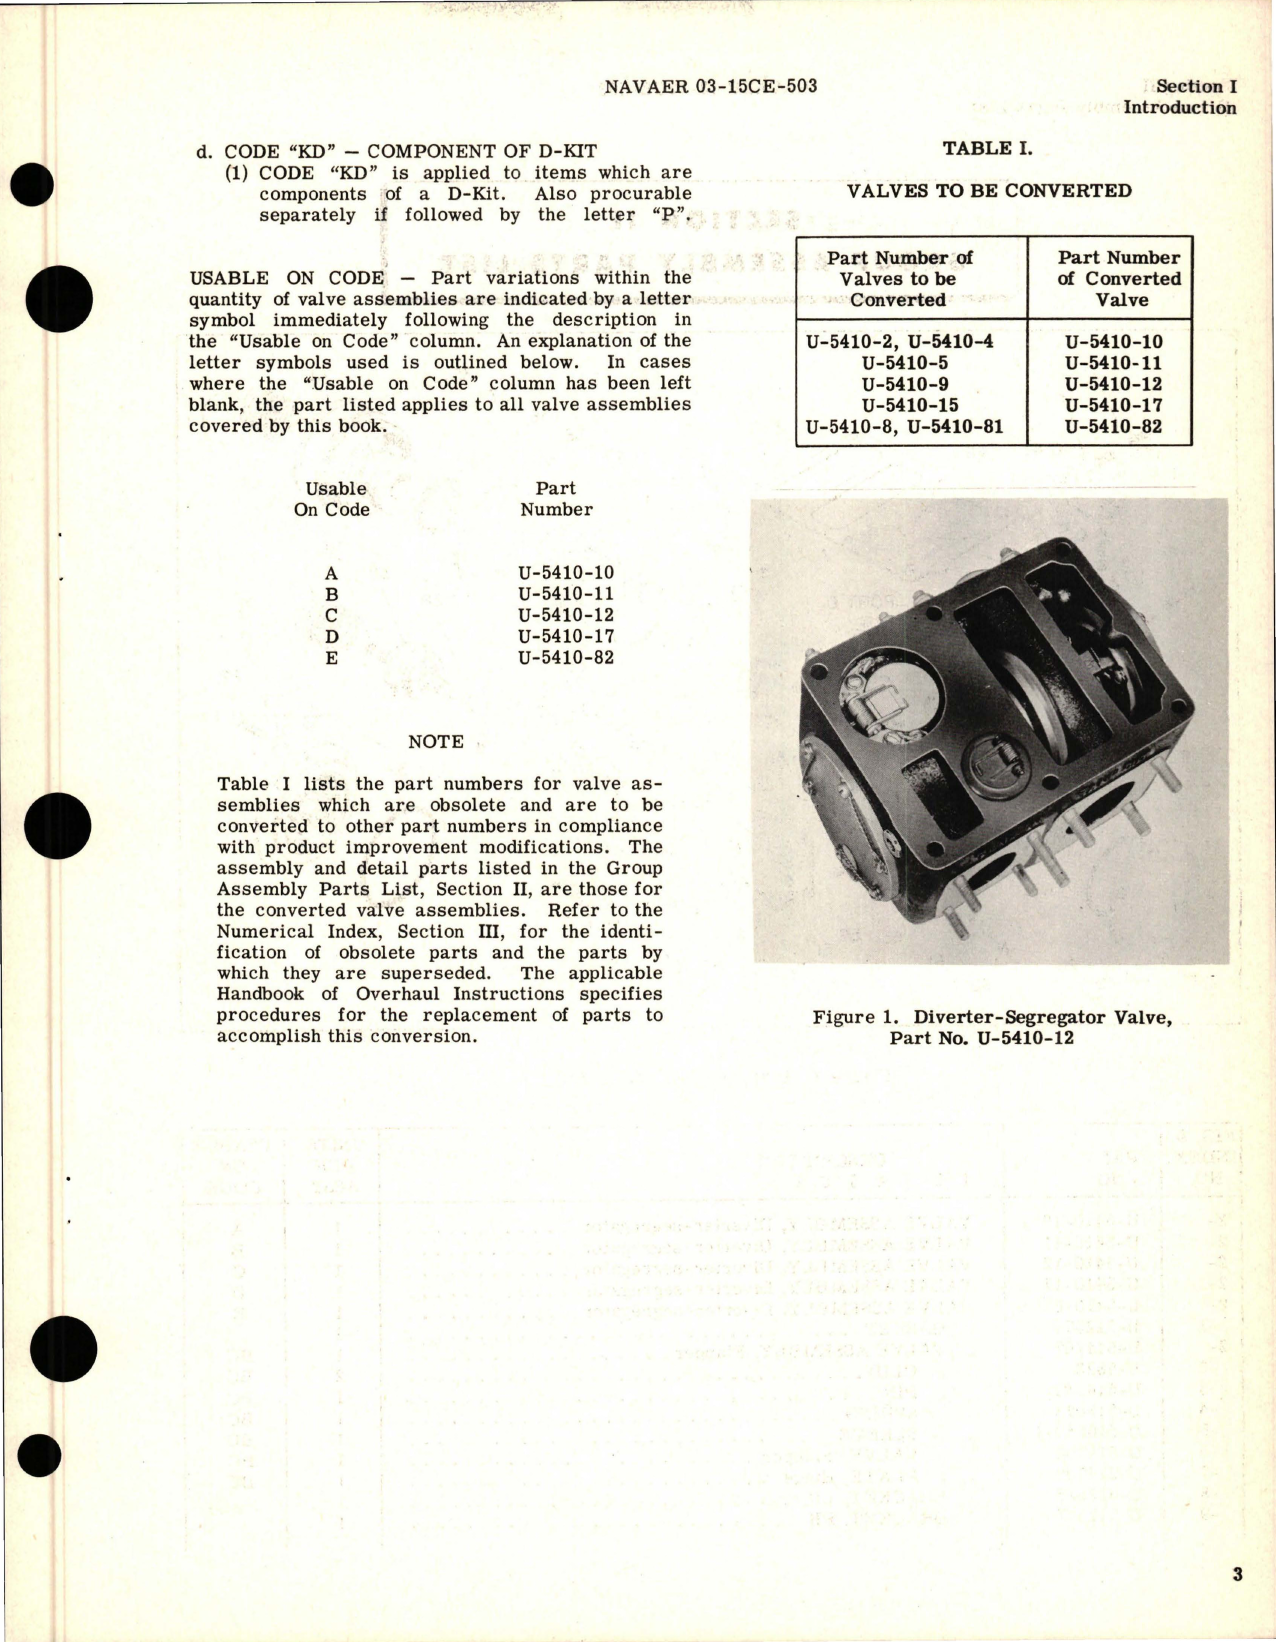 Sample page 5 from AirCorps Library document: Illustrated Parts Breakdown for Diverter Segregator Valve Assemblies